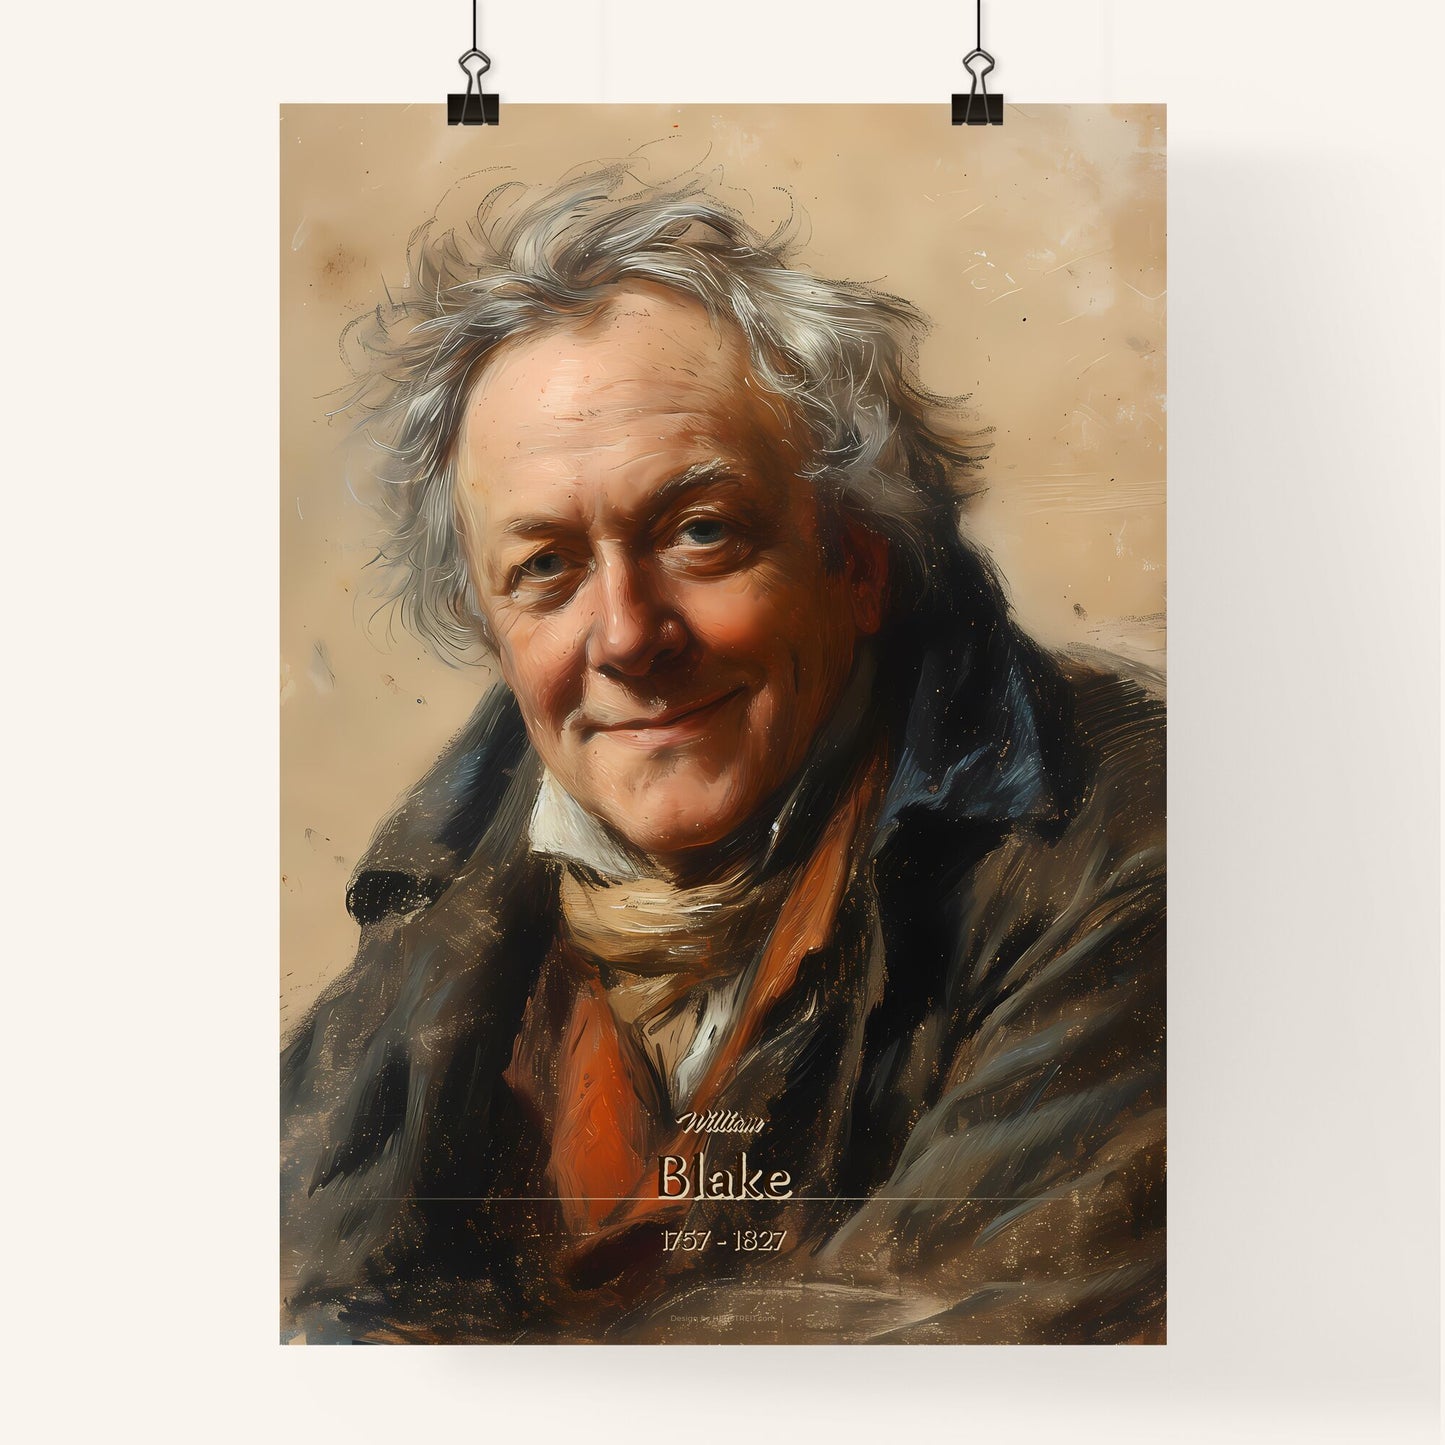 William, Blake, 1757 - 1827, A Poster of a man with grey hair and a scarf Default Title